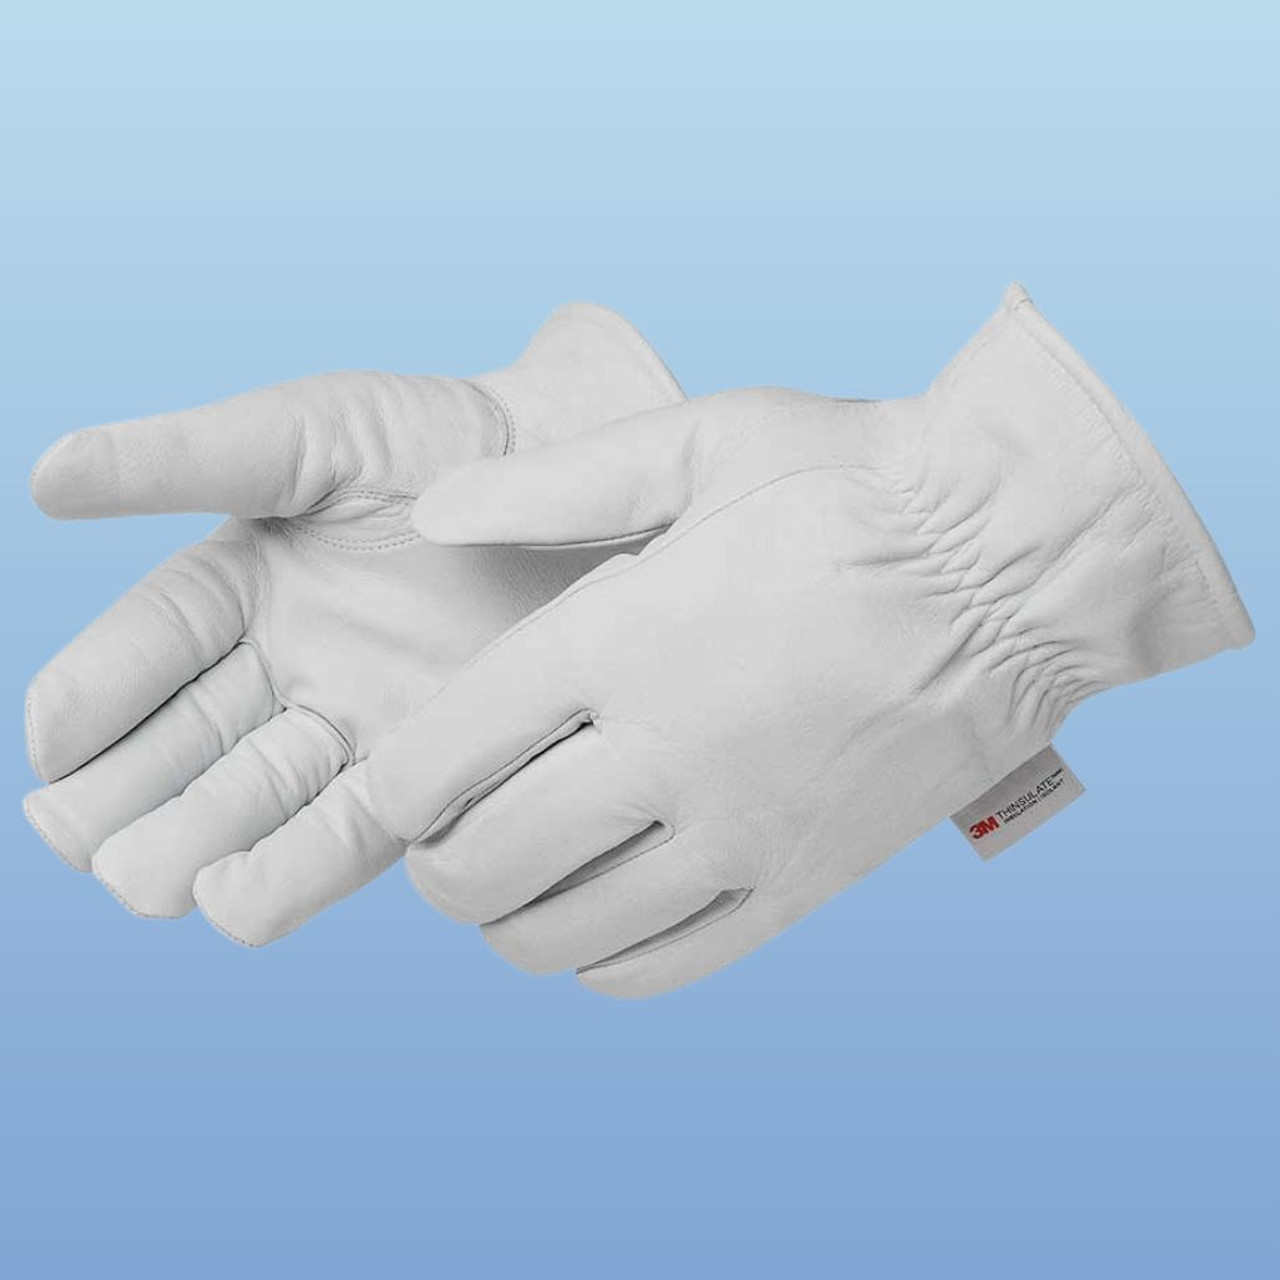 Insulated Leather Gloves S